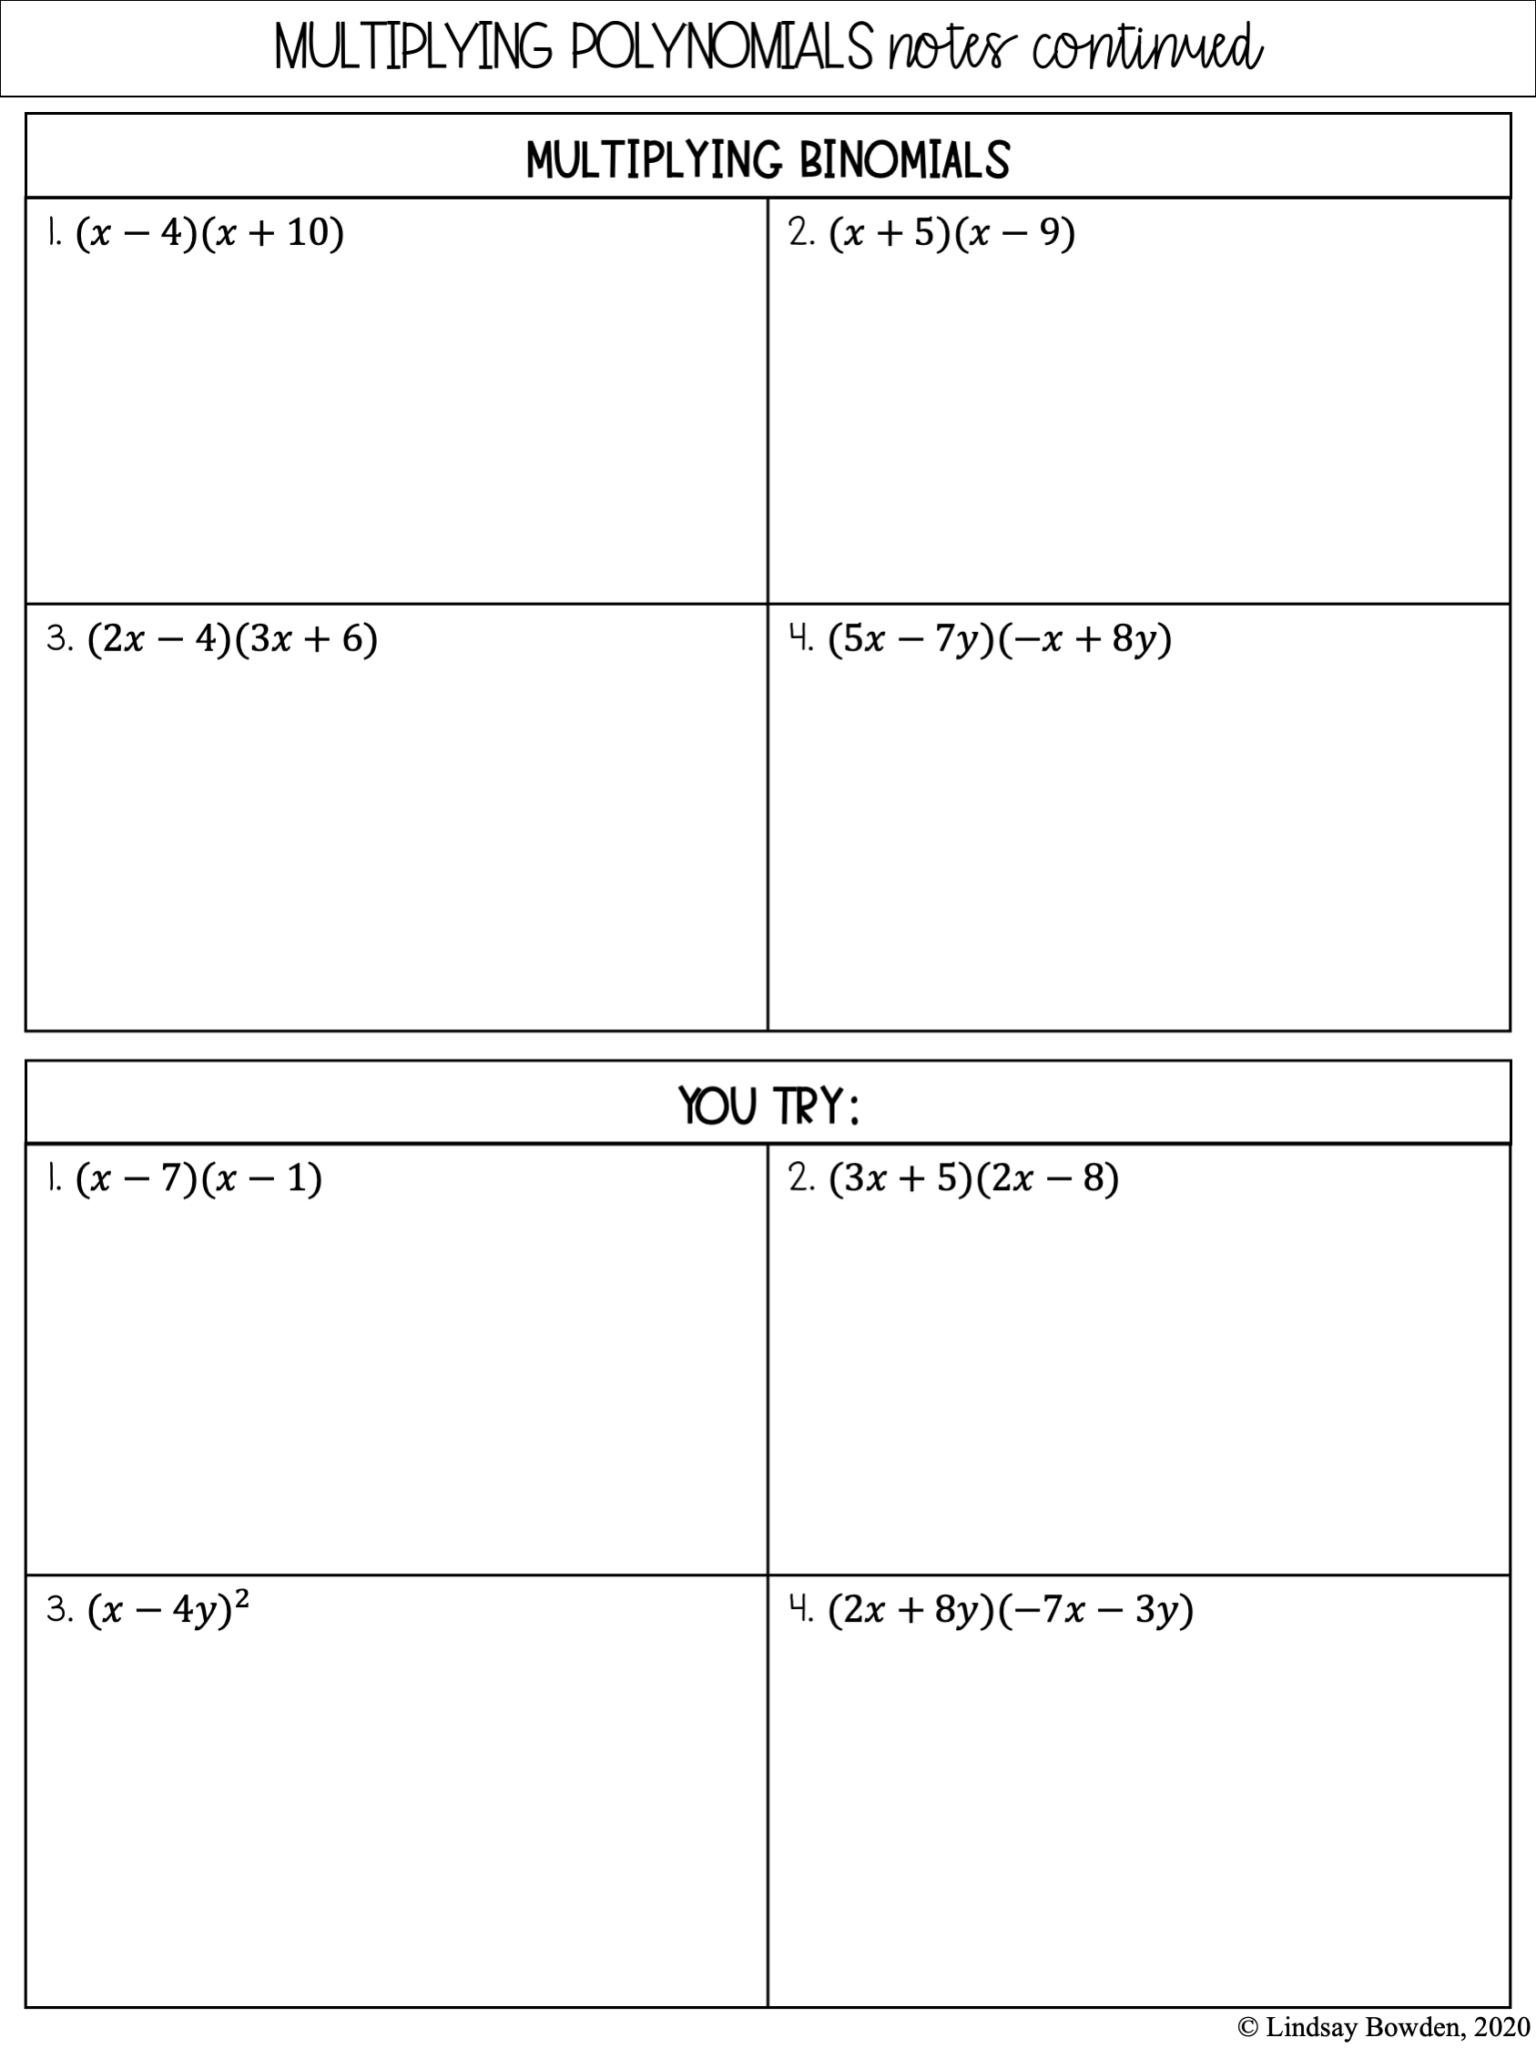 Multiplying Polynomials Notes and Worksheets Lindsay Bowden